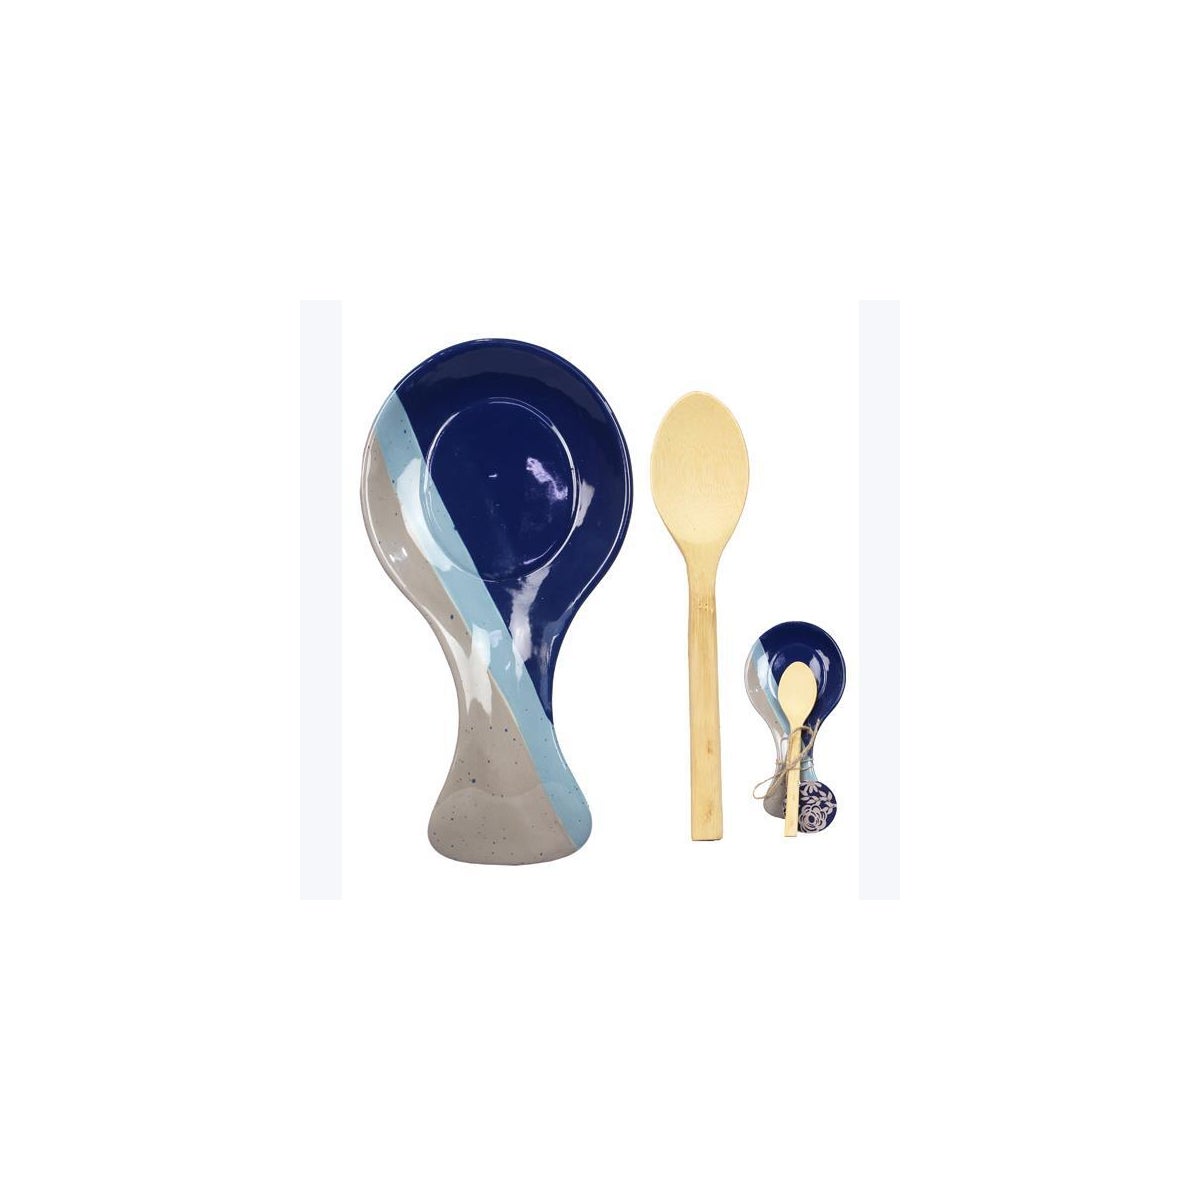 Ceramic Artistic Blue Spoon Rest with Wood Spoon.